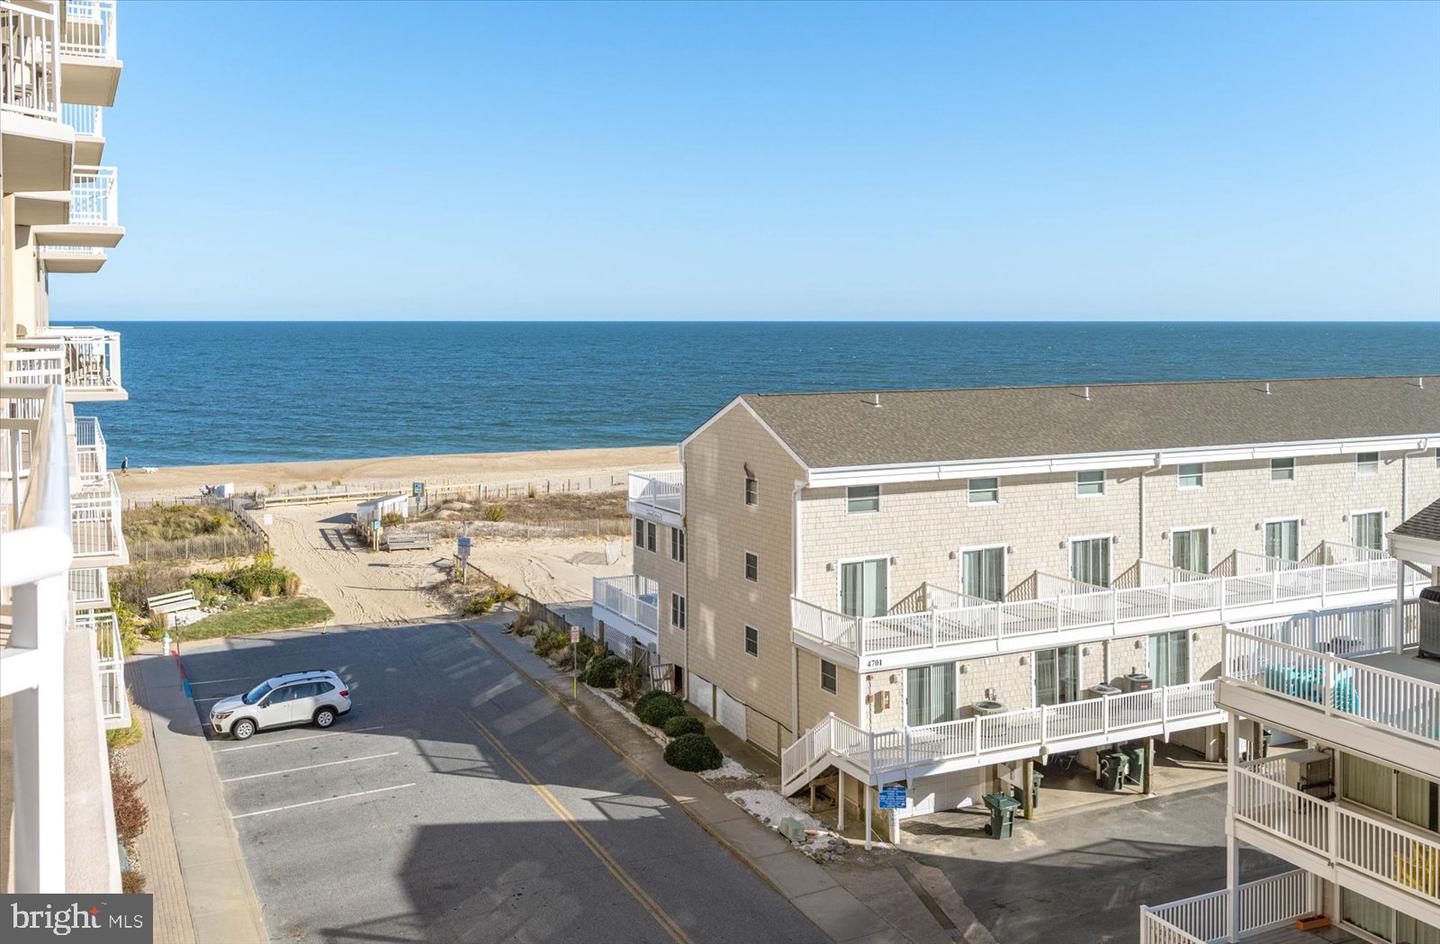 MDWO2017306-802698896922-2024-04-30-15-14-59 2 48th St #402 | Ocean City, MD Real Estate For Sale | MLS# Mdwo2017306  - 1st Choice Properties